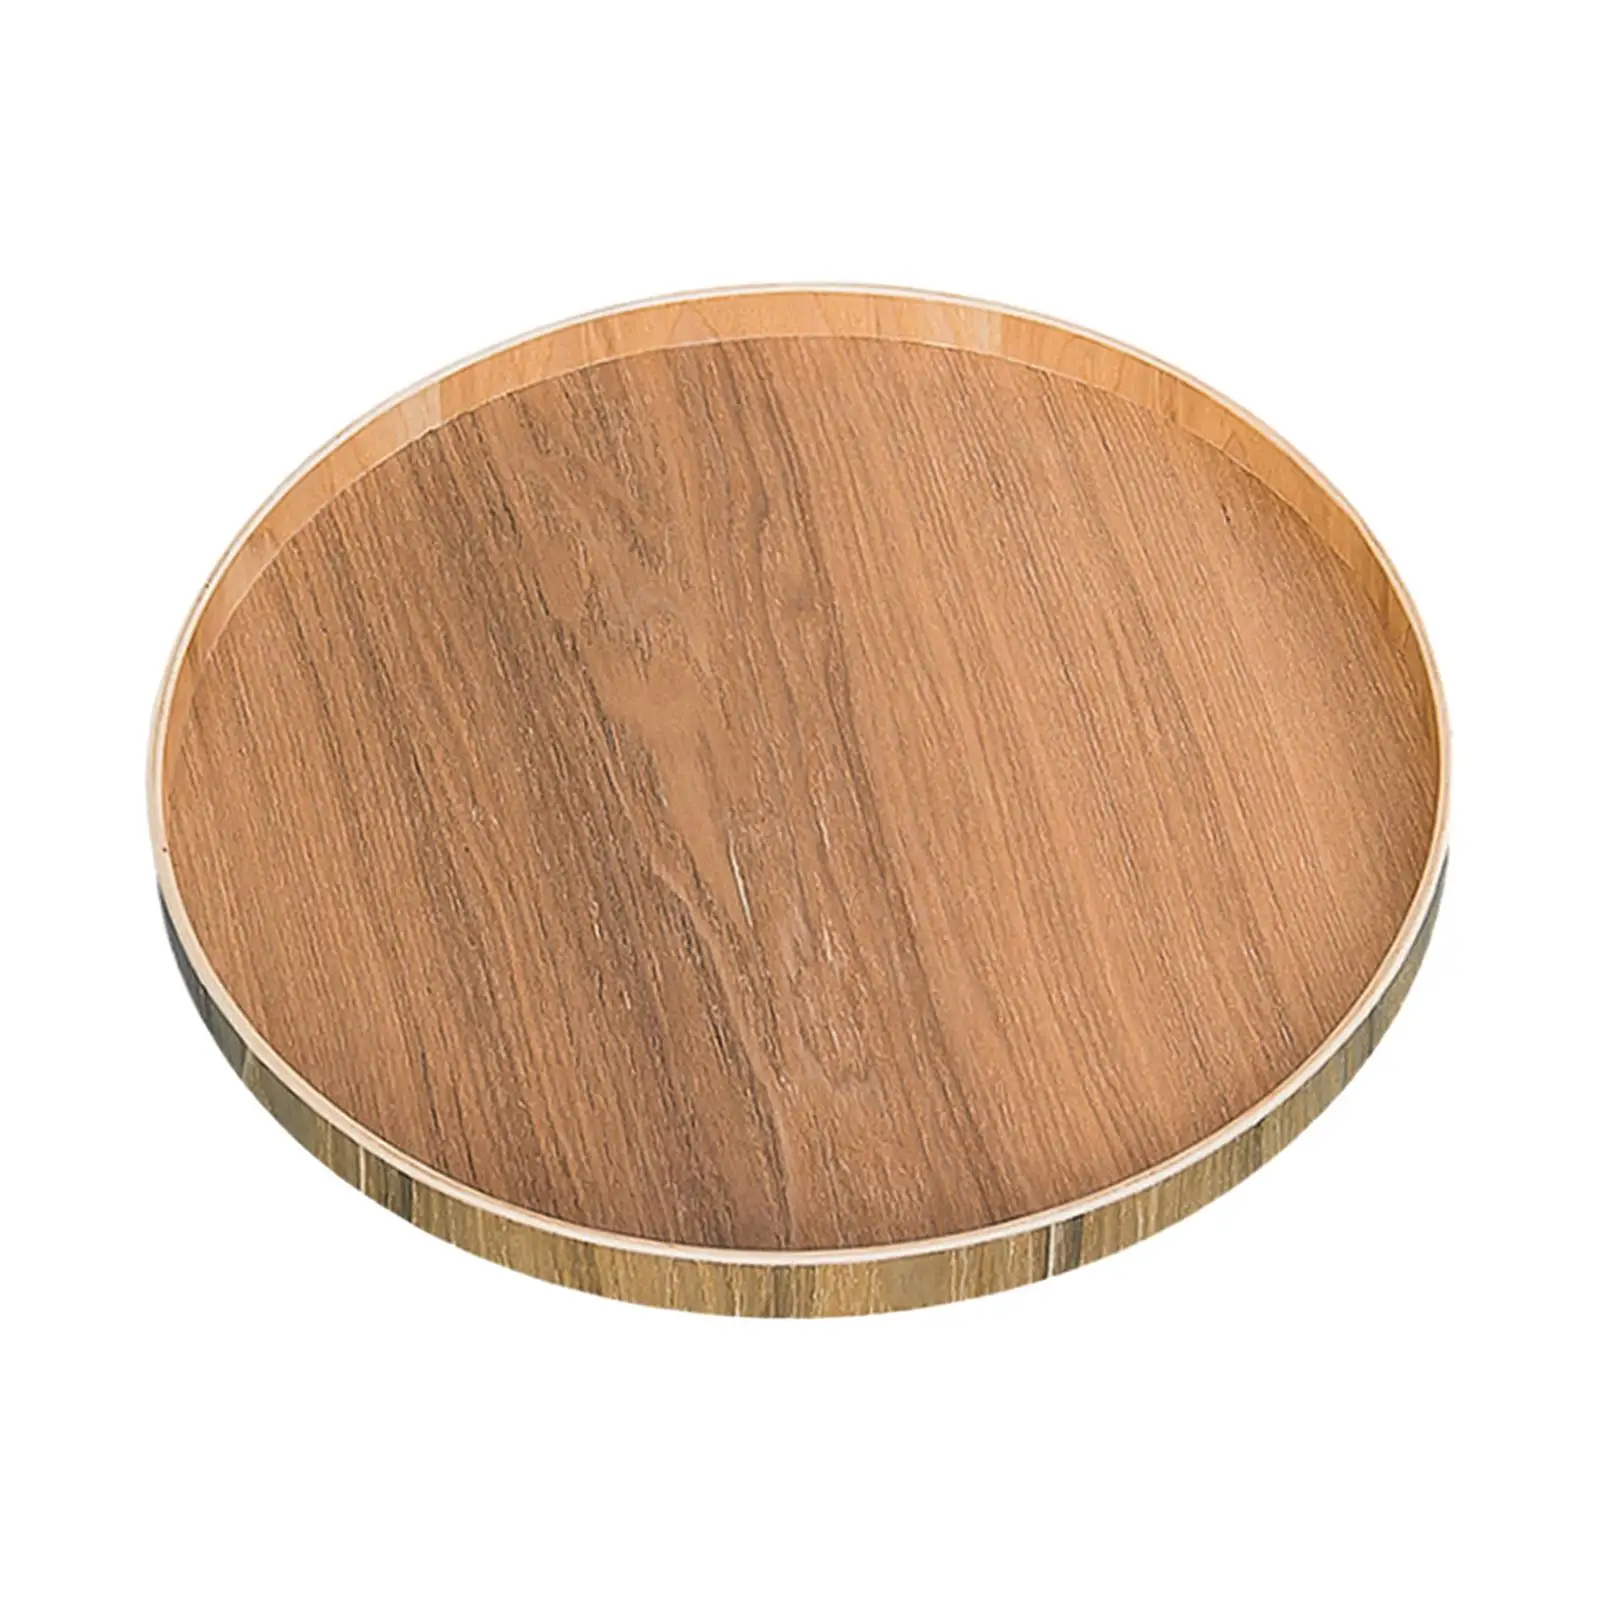 Wooden Serving Plate Breakfast Tray Dessert Tray Party Serving Platter for Kitchen Dining Table Home Bathroom Table Centerpiece